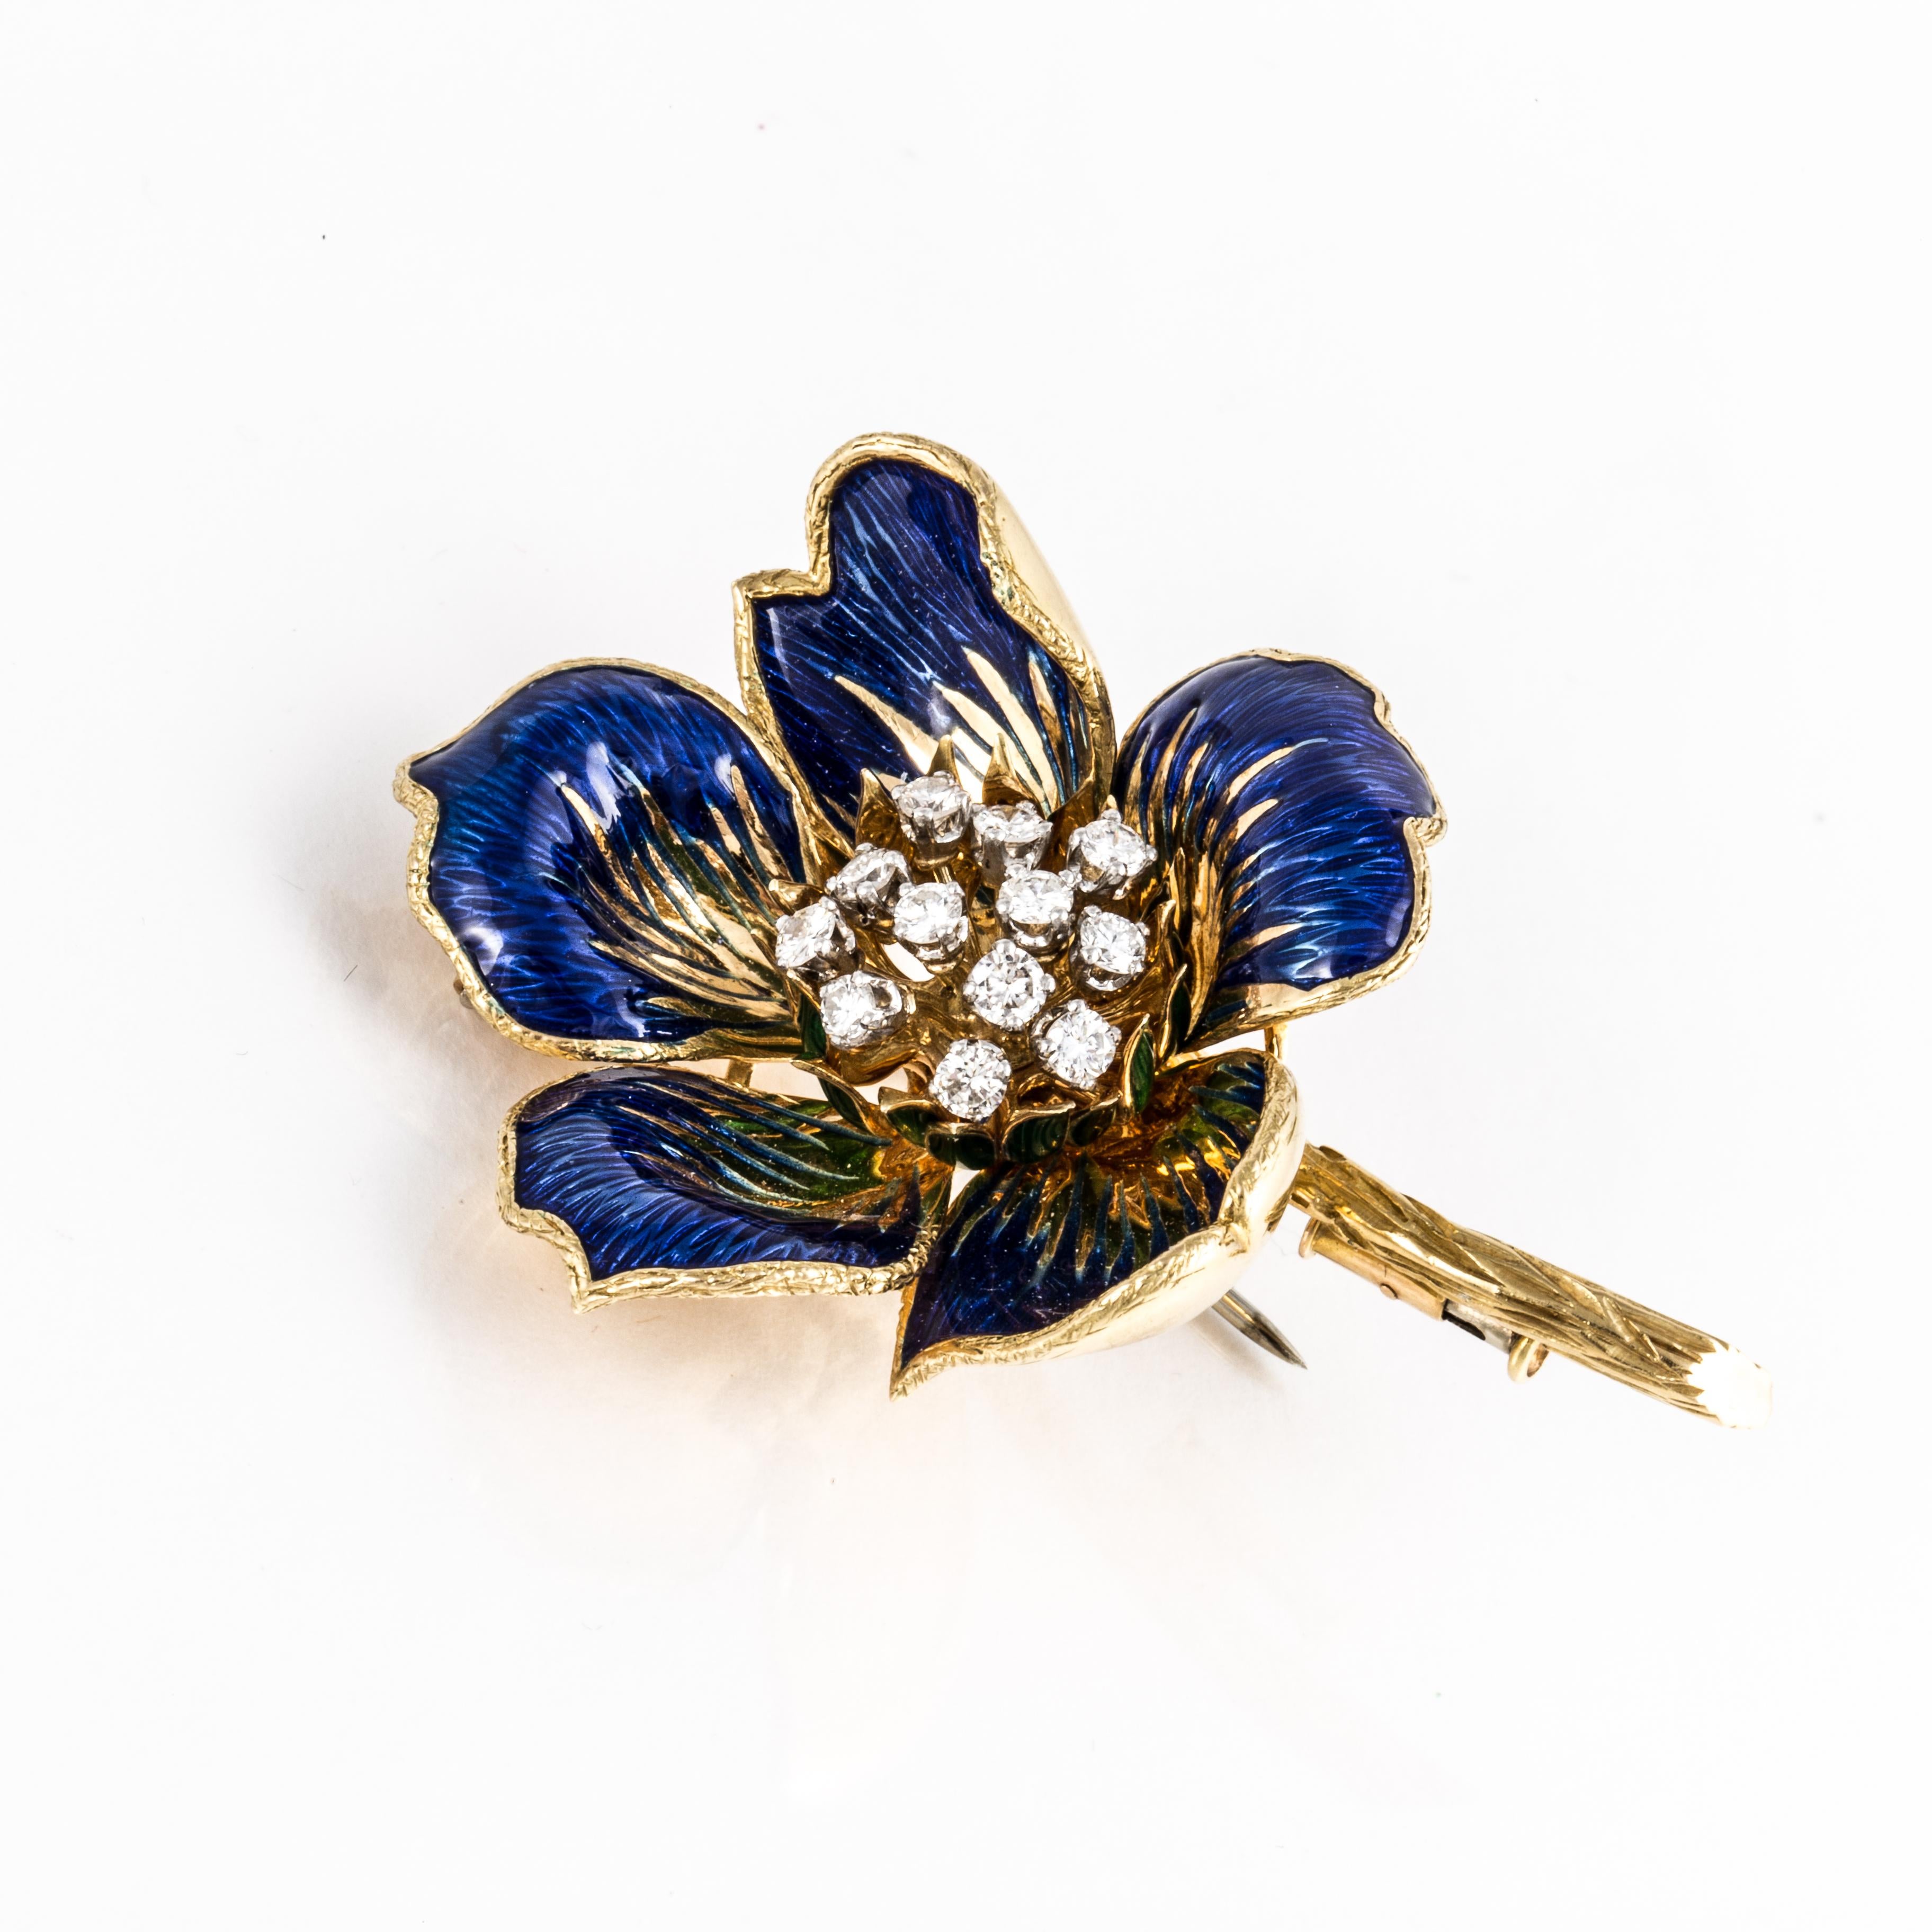 Blue enamel flower brooch in 18K yellow gold with round cut diamonds in the center.  There are 12 round diamonds that total 1.10 carats; G-H color and VS2-SI1 clarity.  Pin measures 2 1/4 inches long and 1 1/2 inches wide.  Closure is a double clip